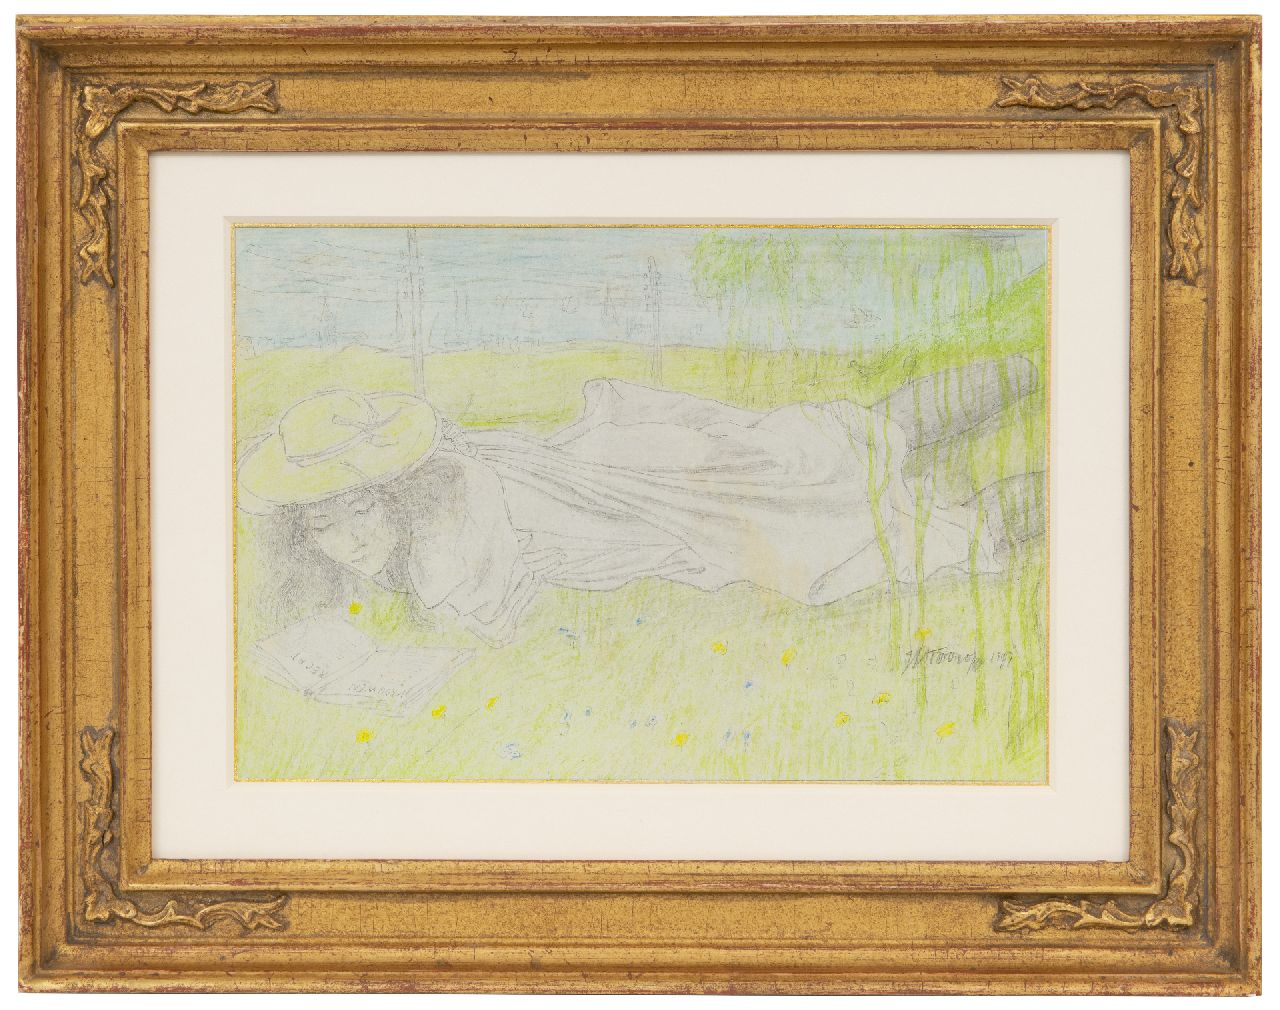 Toorop J.Th.  | Johannes Theodorus 'Jan' Toorop | Watercolours and drawings offered for sale | Young woman reading feminist prose ('Vrouwenrecht'), pencil and chalk on paper 16.2 x 20.5 cm, signed l.r. and dated 1897